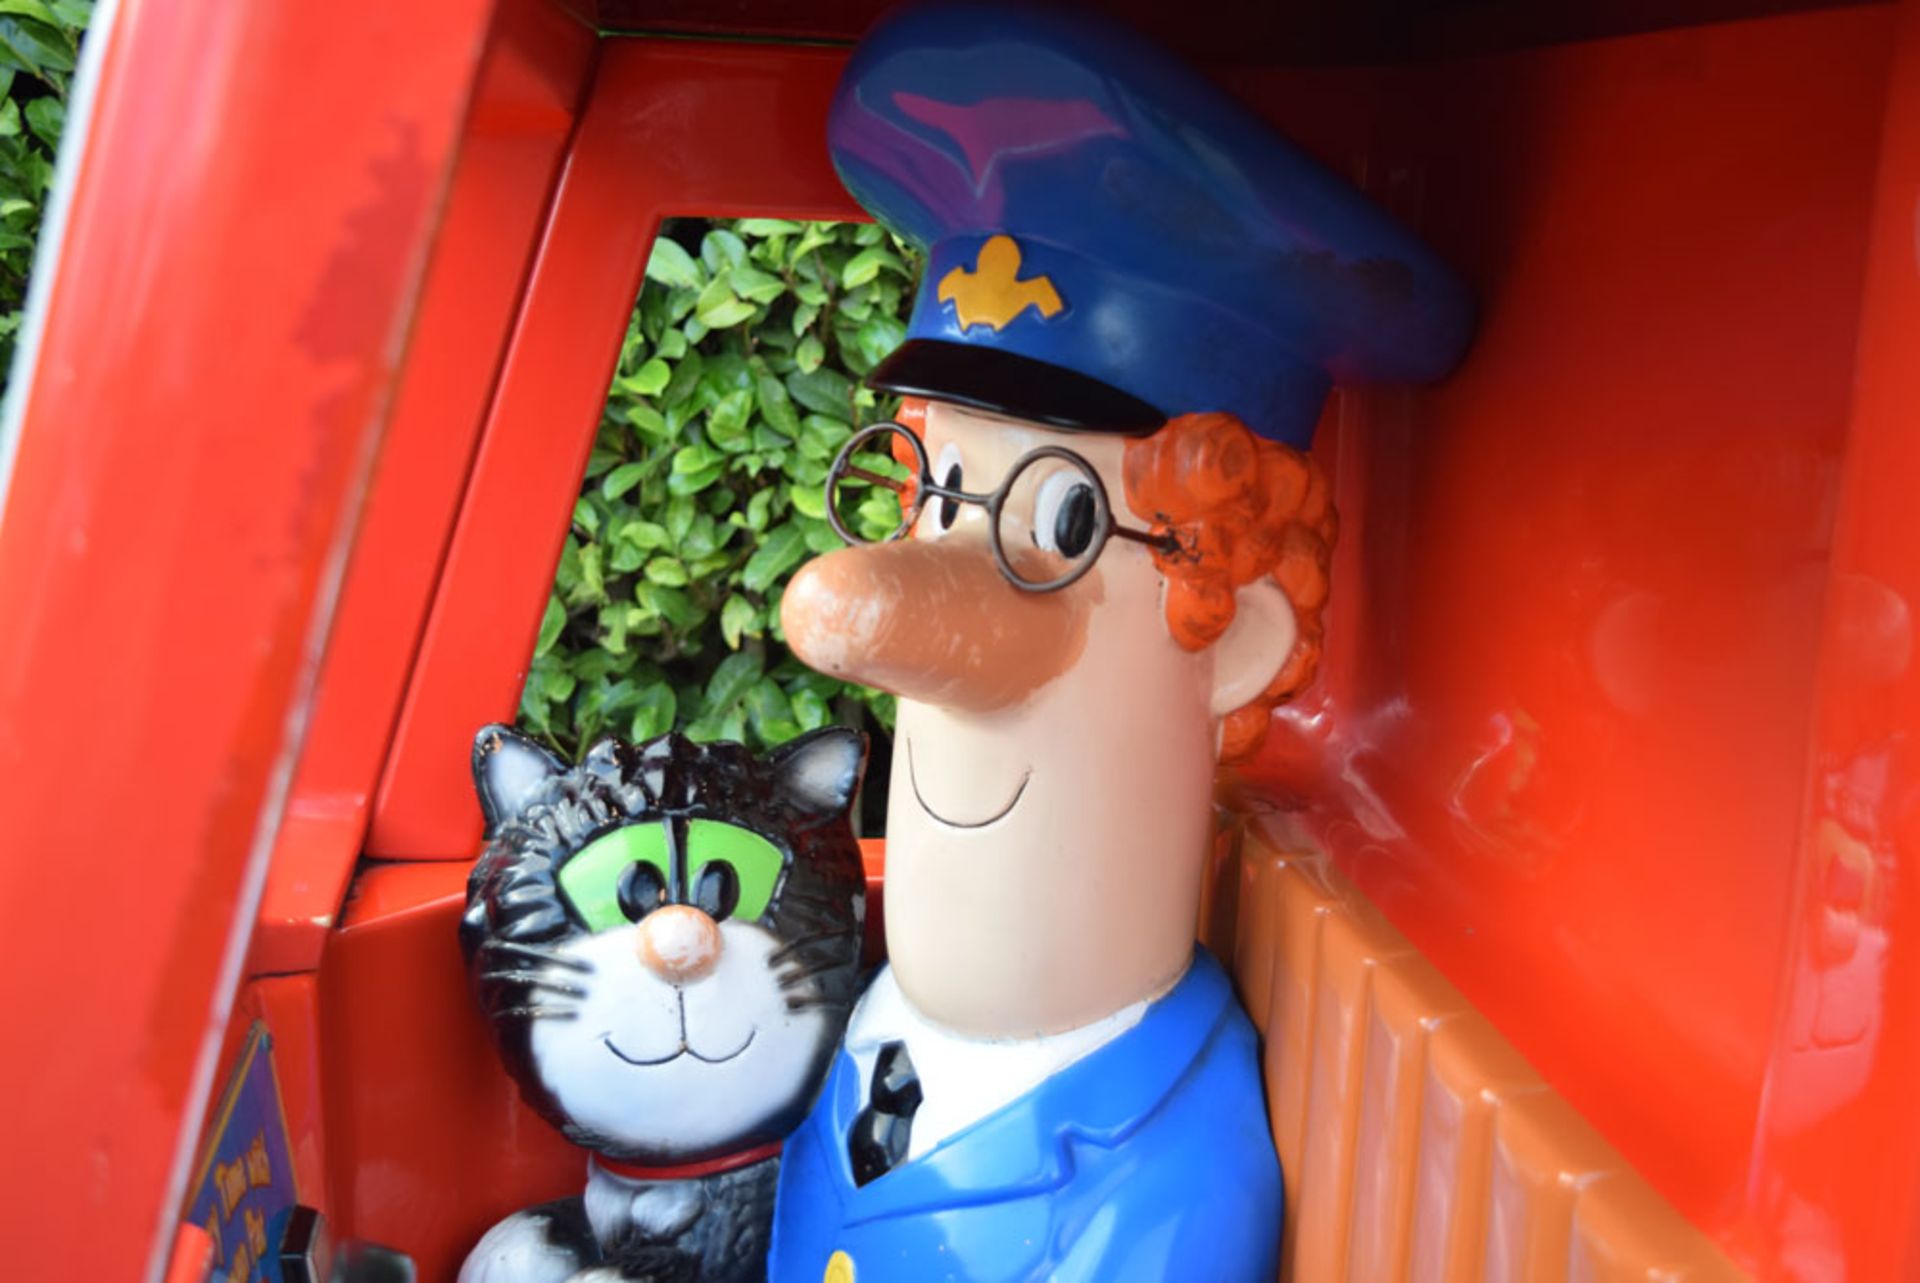 Postman Pat Child's Coin Operated Ride On Arcade Machine. - Image 5 of 6